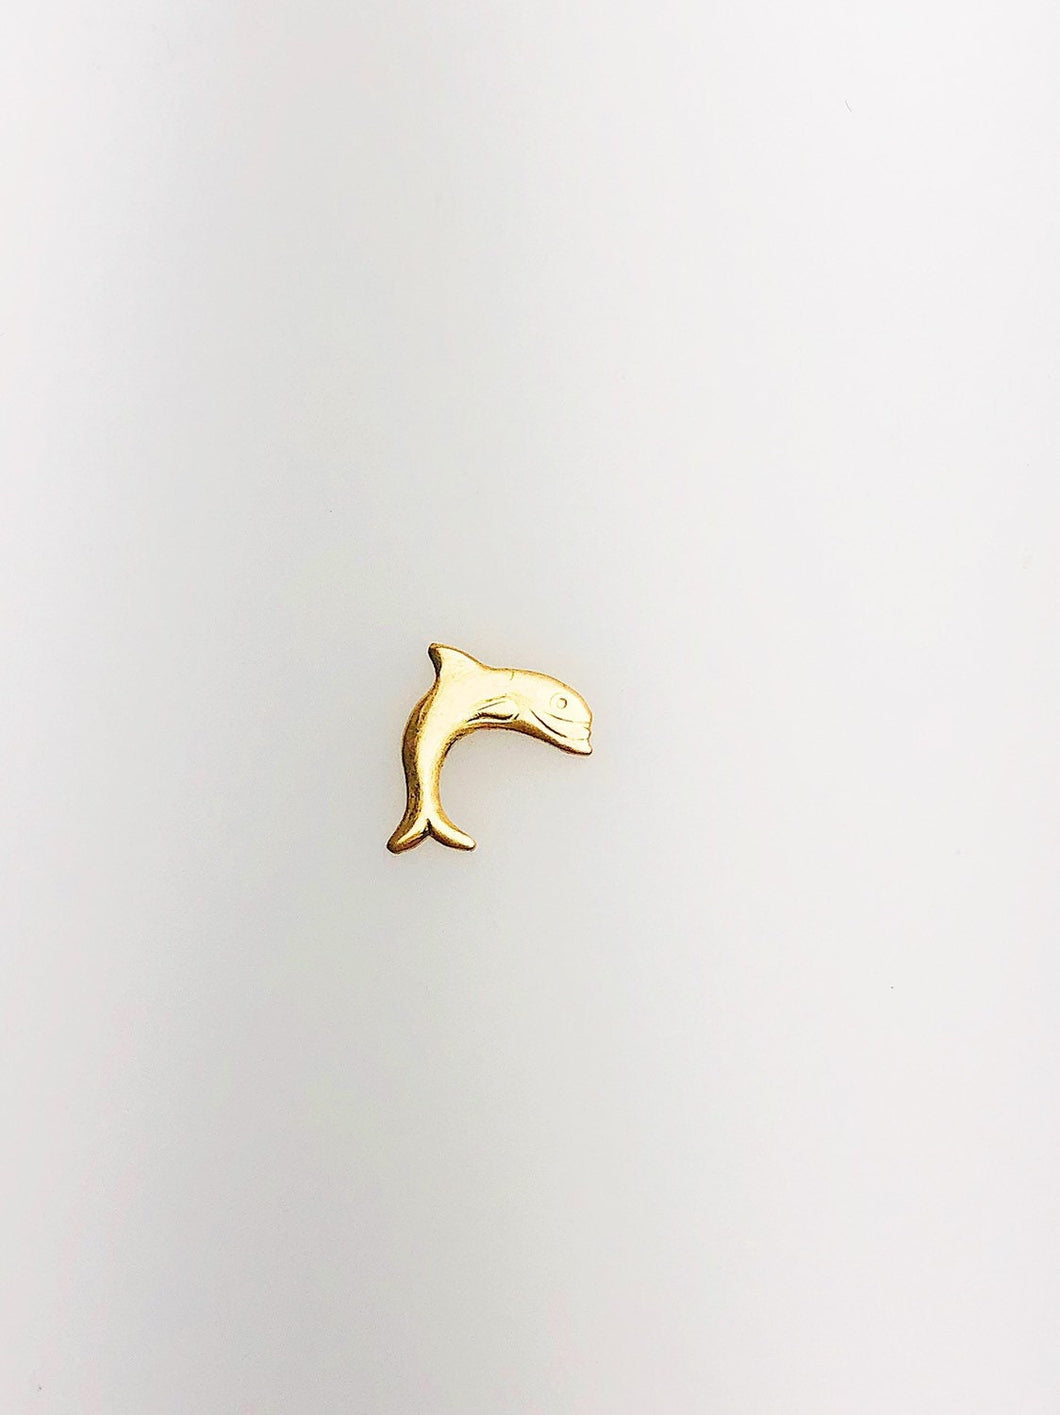 14K Gold Fill Dolphin Charm w/out Ring, 8.4x10.3mm, Made in USA - 684